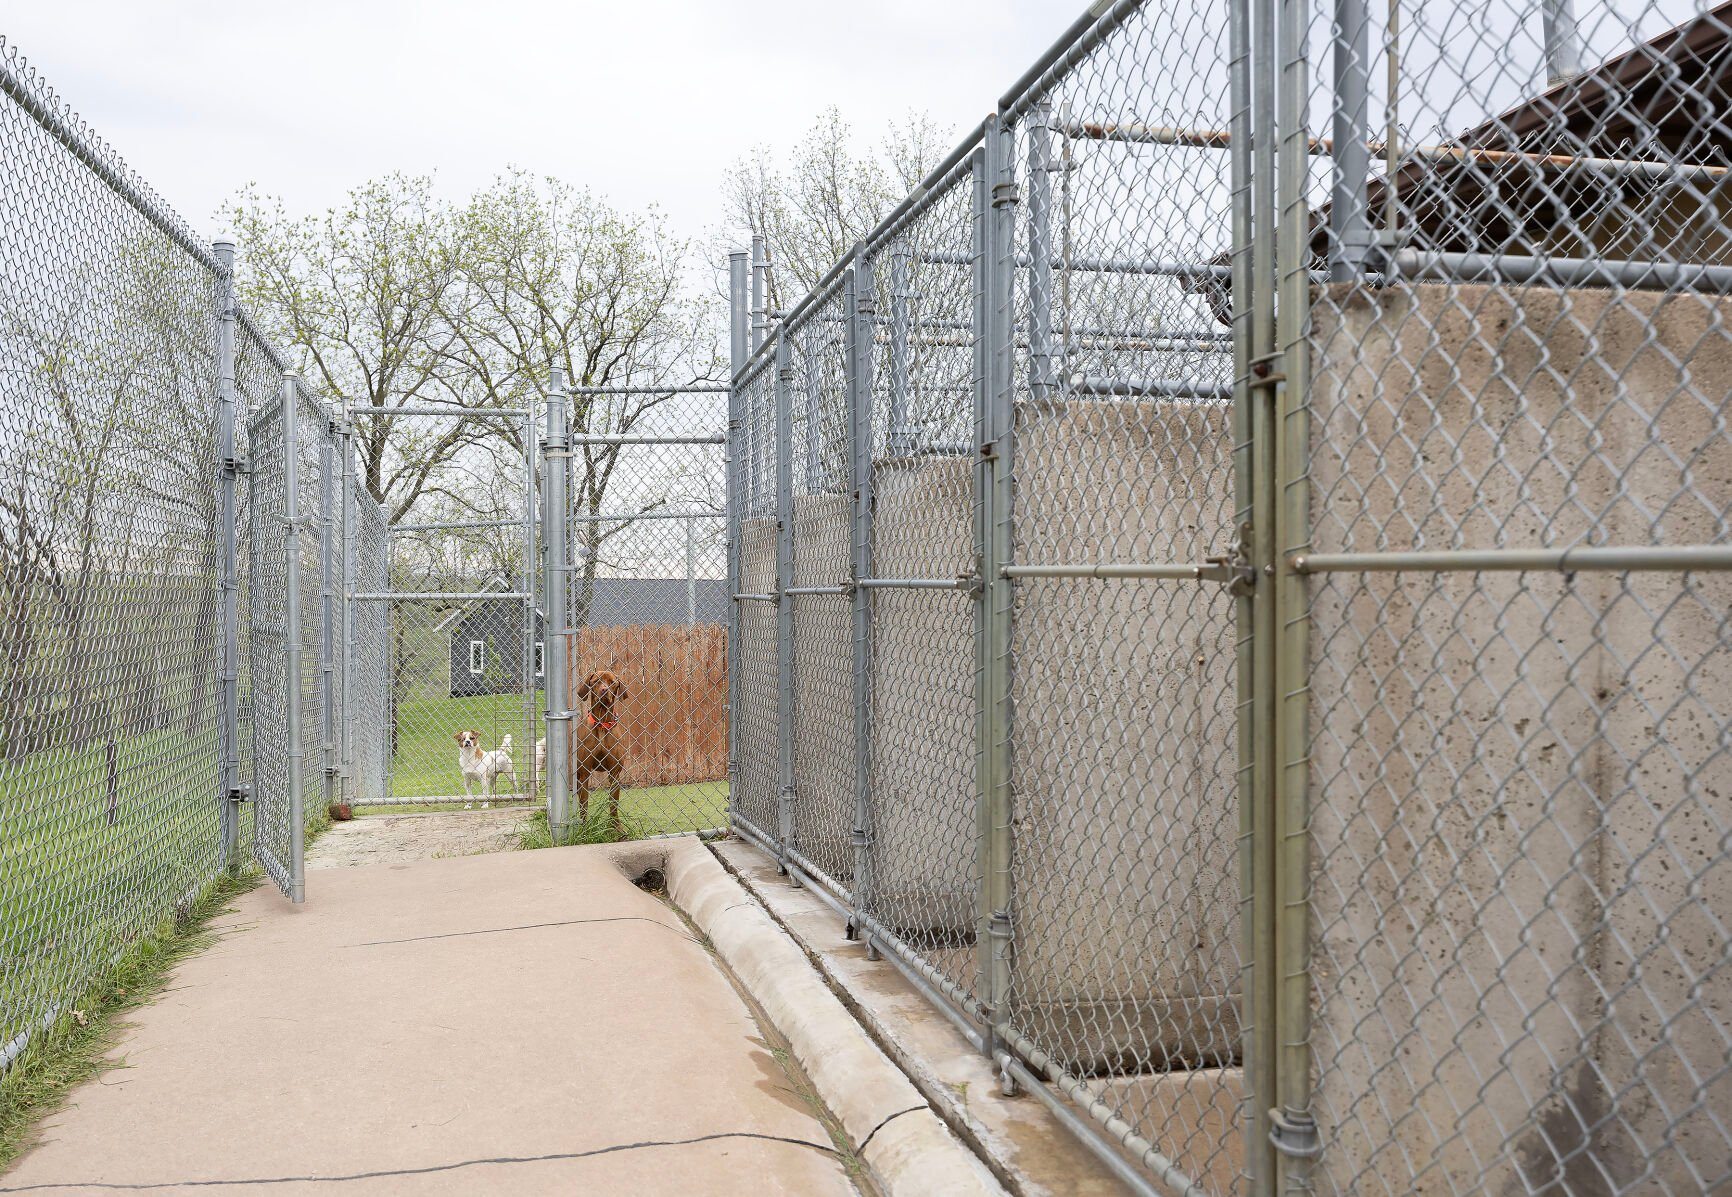 The outdoor side of the dog kennels at Mississippi Ridge Kennel near Bellevue, Iowa.    PHOTO CREDIT: Stephen Gassman